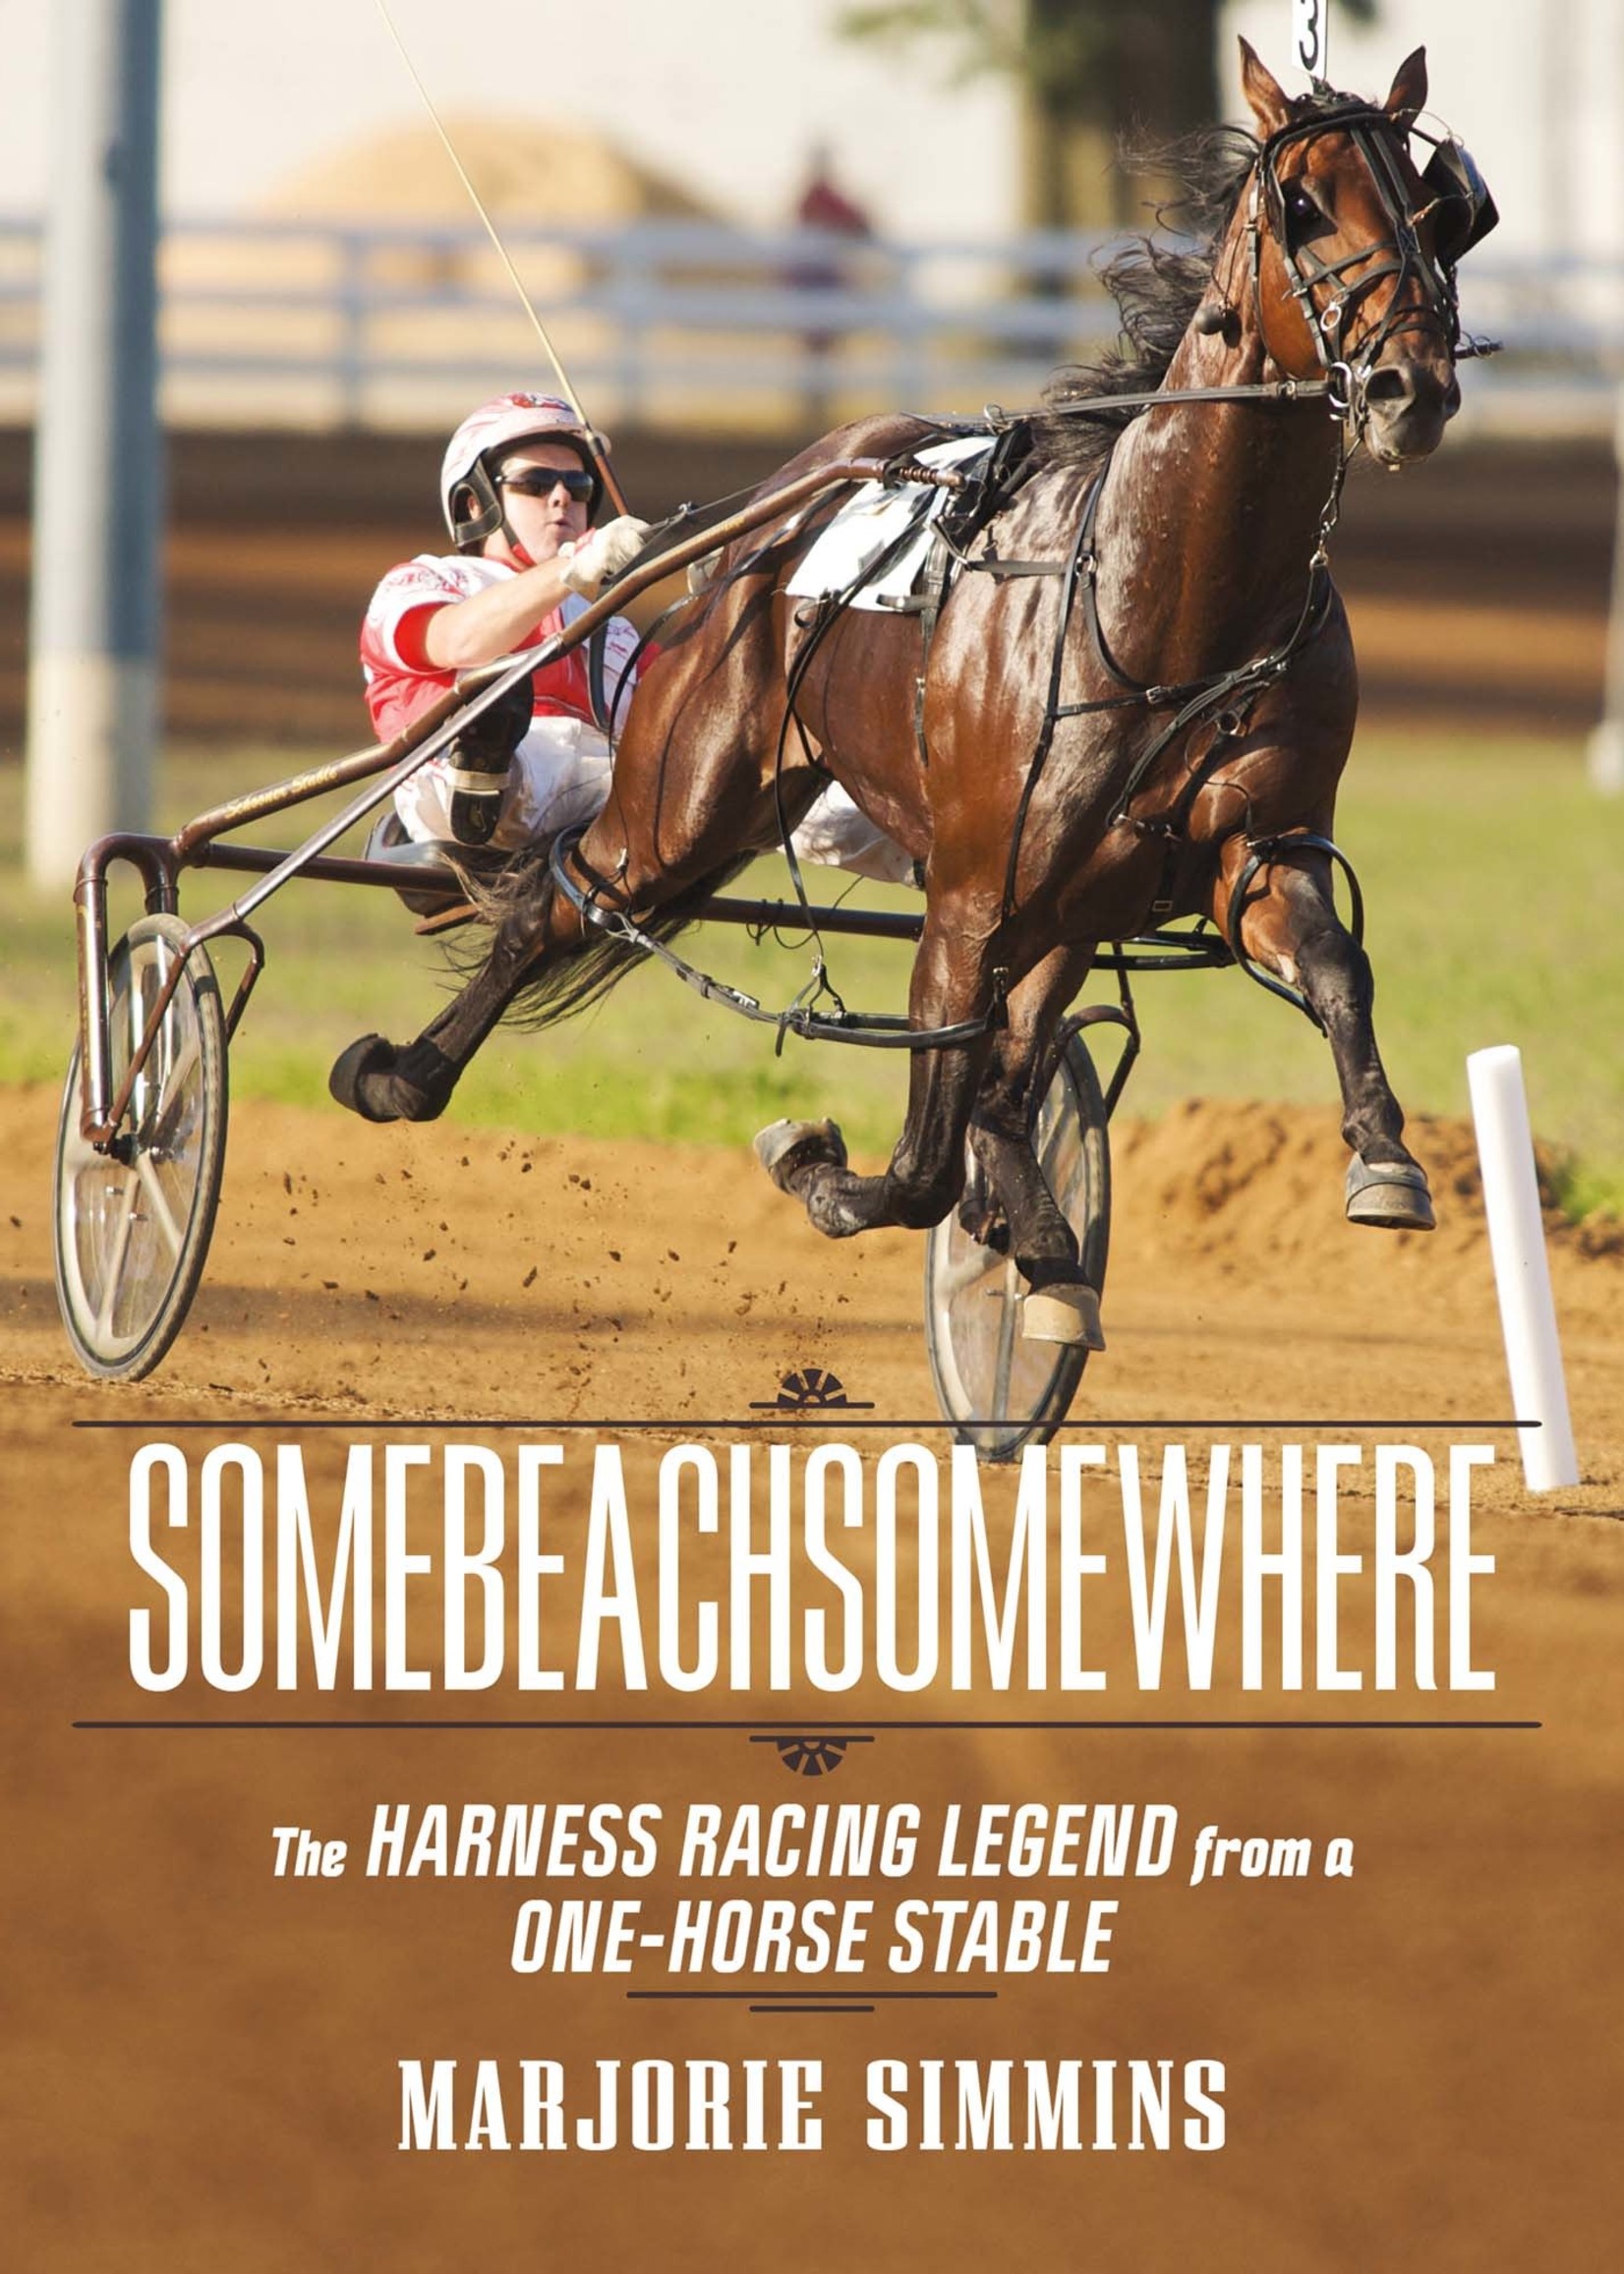 Somebeachsomewhere: A Harness Racing Legend from a One-Horse Stable by Marjorie Simmins